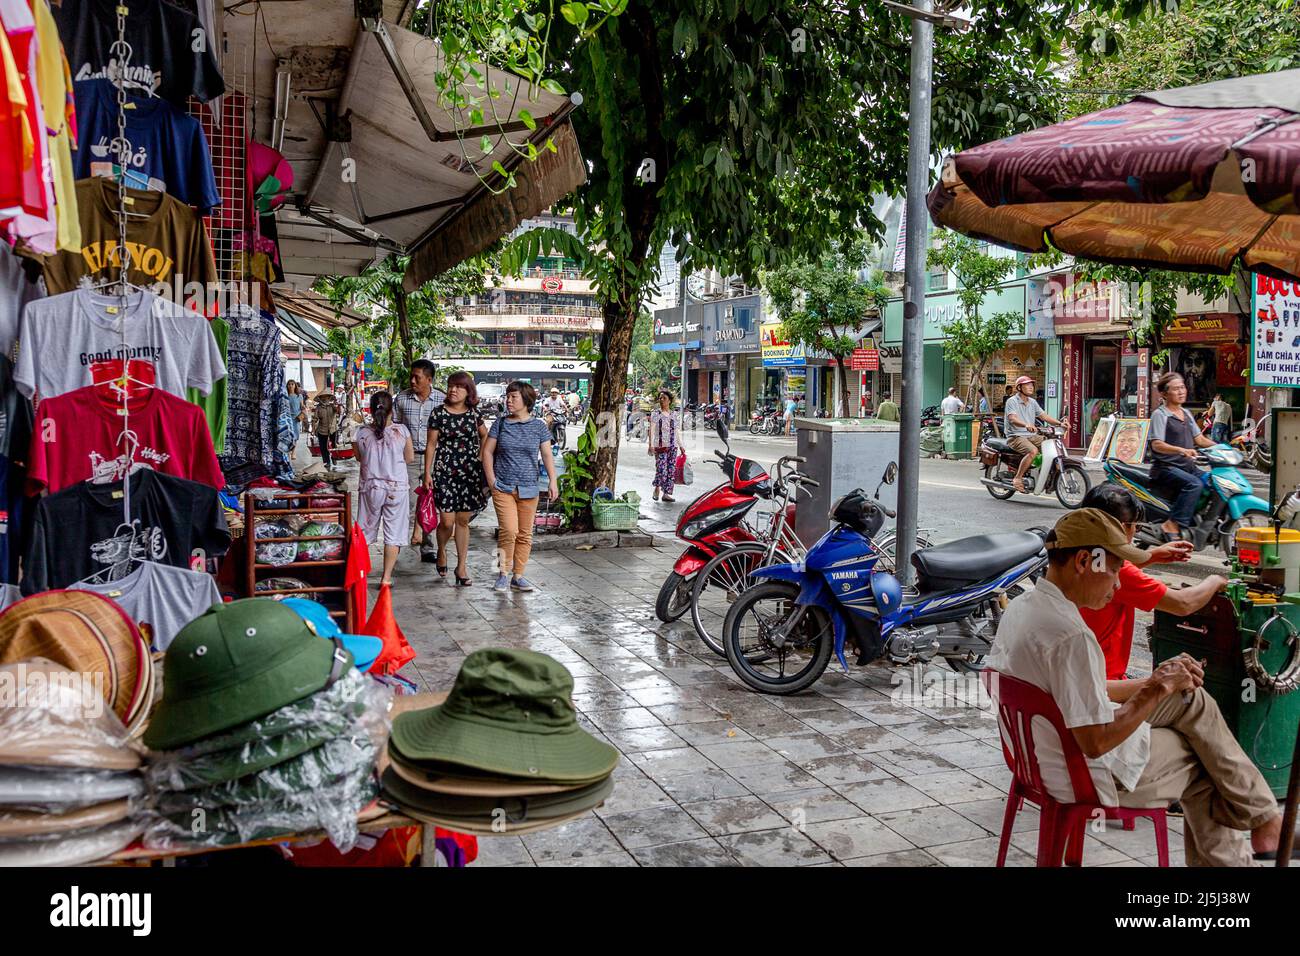 Shoppers in Hanoi walking on wet sidewalks while they shop in the clothing district of the Old Quarter. Stock Photo